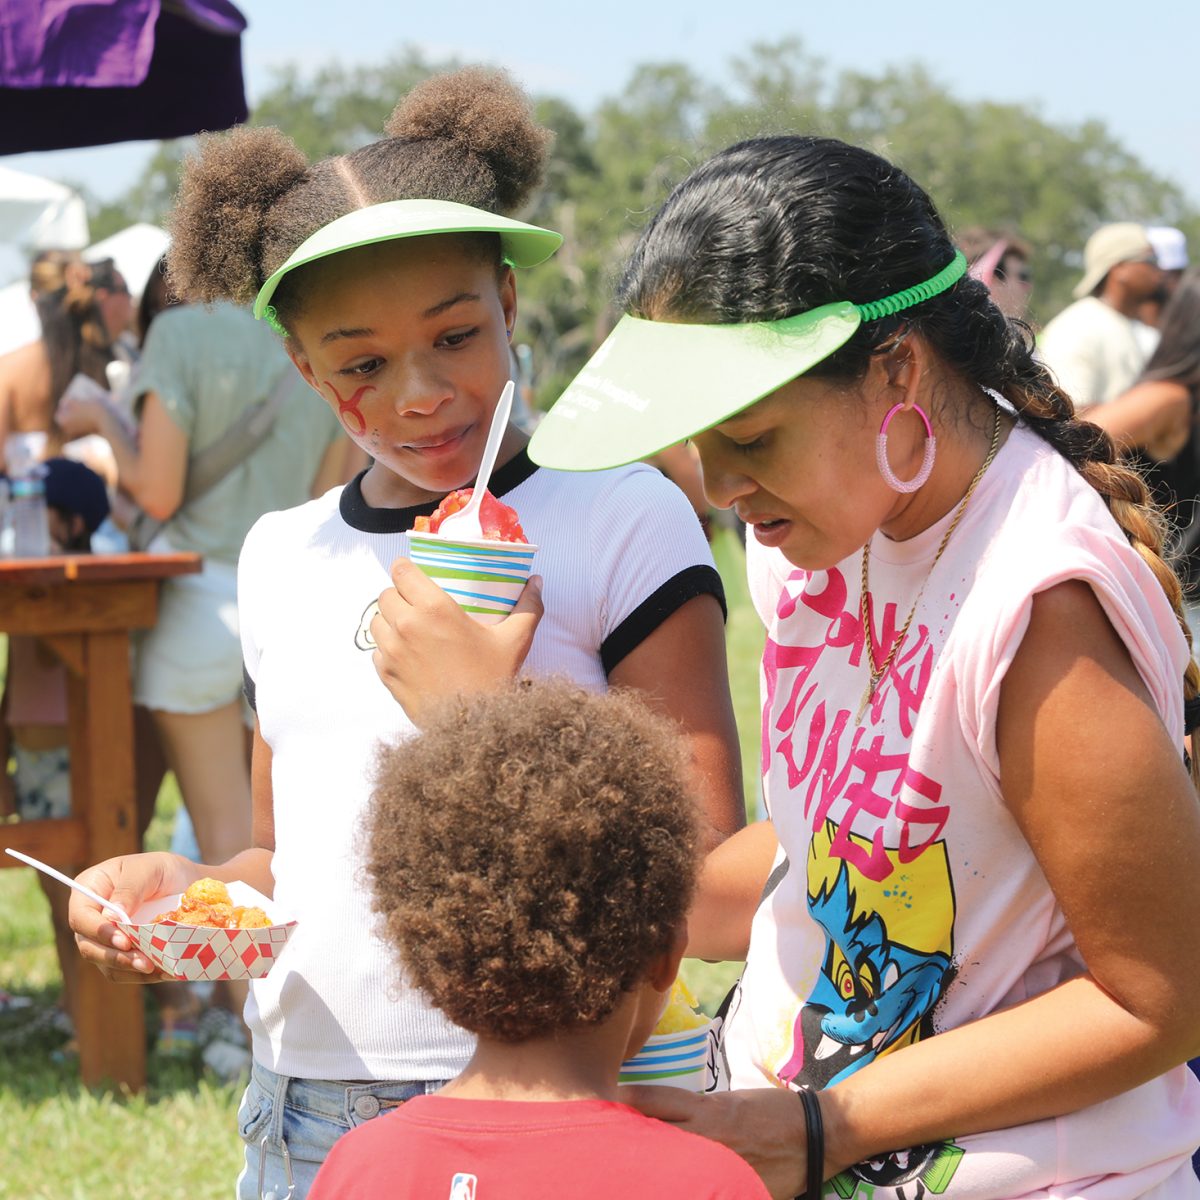 Beignet+Fest+attendees+enjoys+festival+eats+on+Saturday%2C+Sept.+23.+A+fully+activated+and+sensory+friendly+Kids+Village+created+by+Children%E2%80%99s+Hospital+New+Orleans+offered+a+one-of-a-kind+experience+for+all+children.